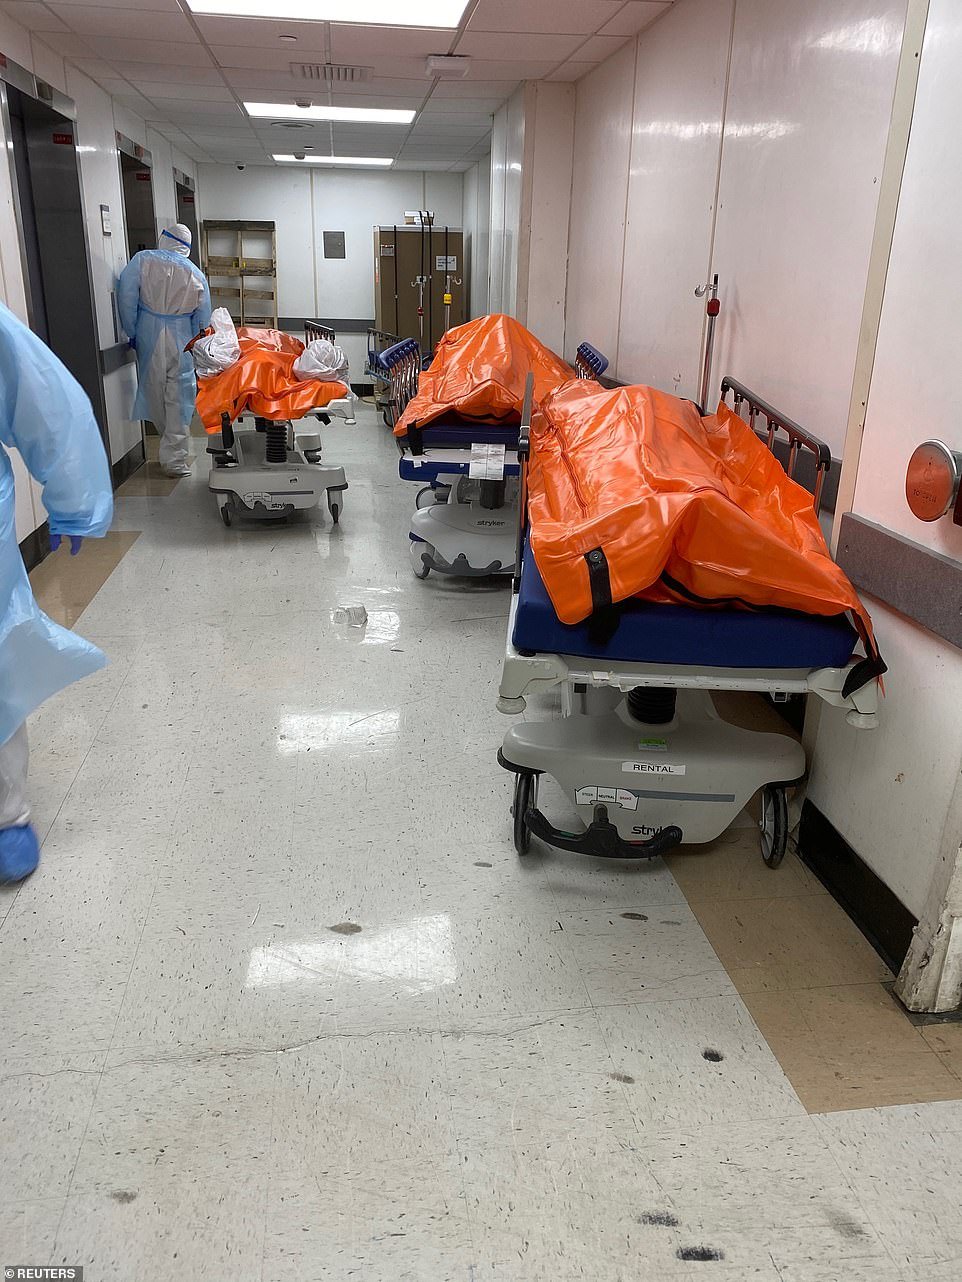 Bodies are seen lying in corridors inside the Wyckoff Hospital as the healthcare system is overwhelmed with fatalities